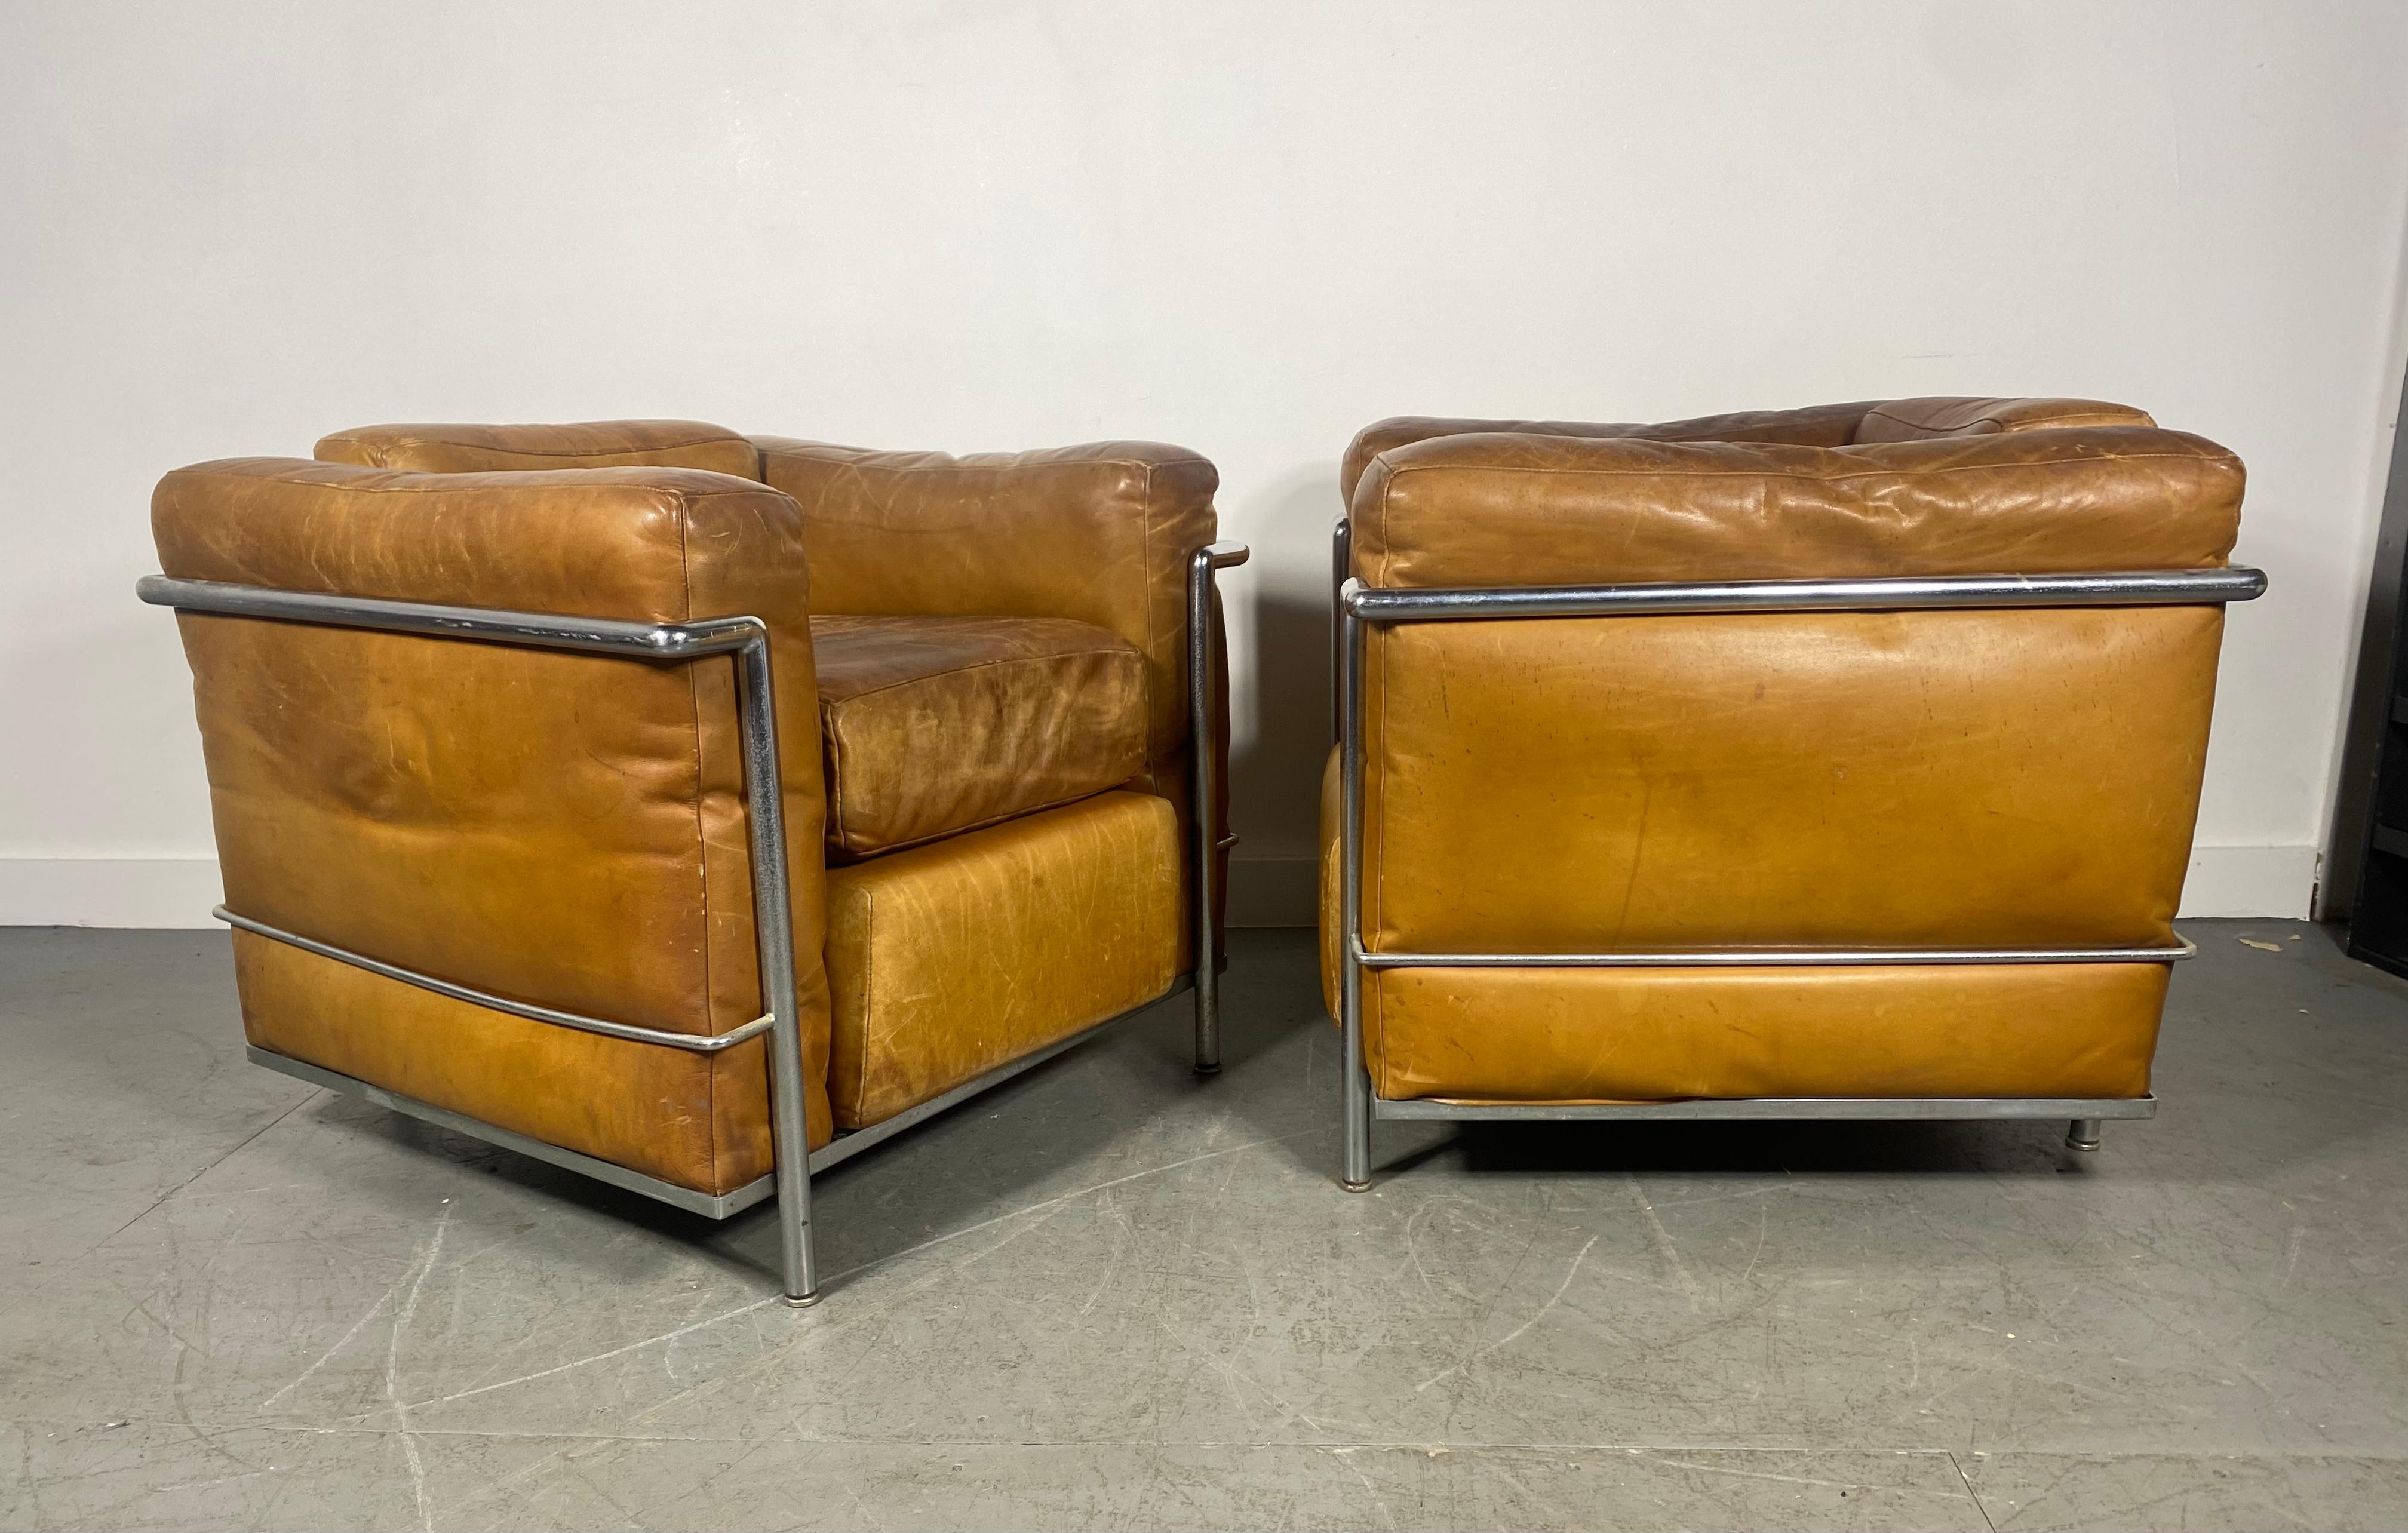 Bauhaus Early Le Corbusier LC2 Petite Modele Armchair in Original Tobacco Leather For Sale